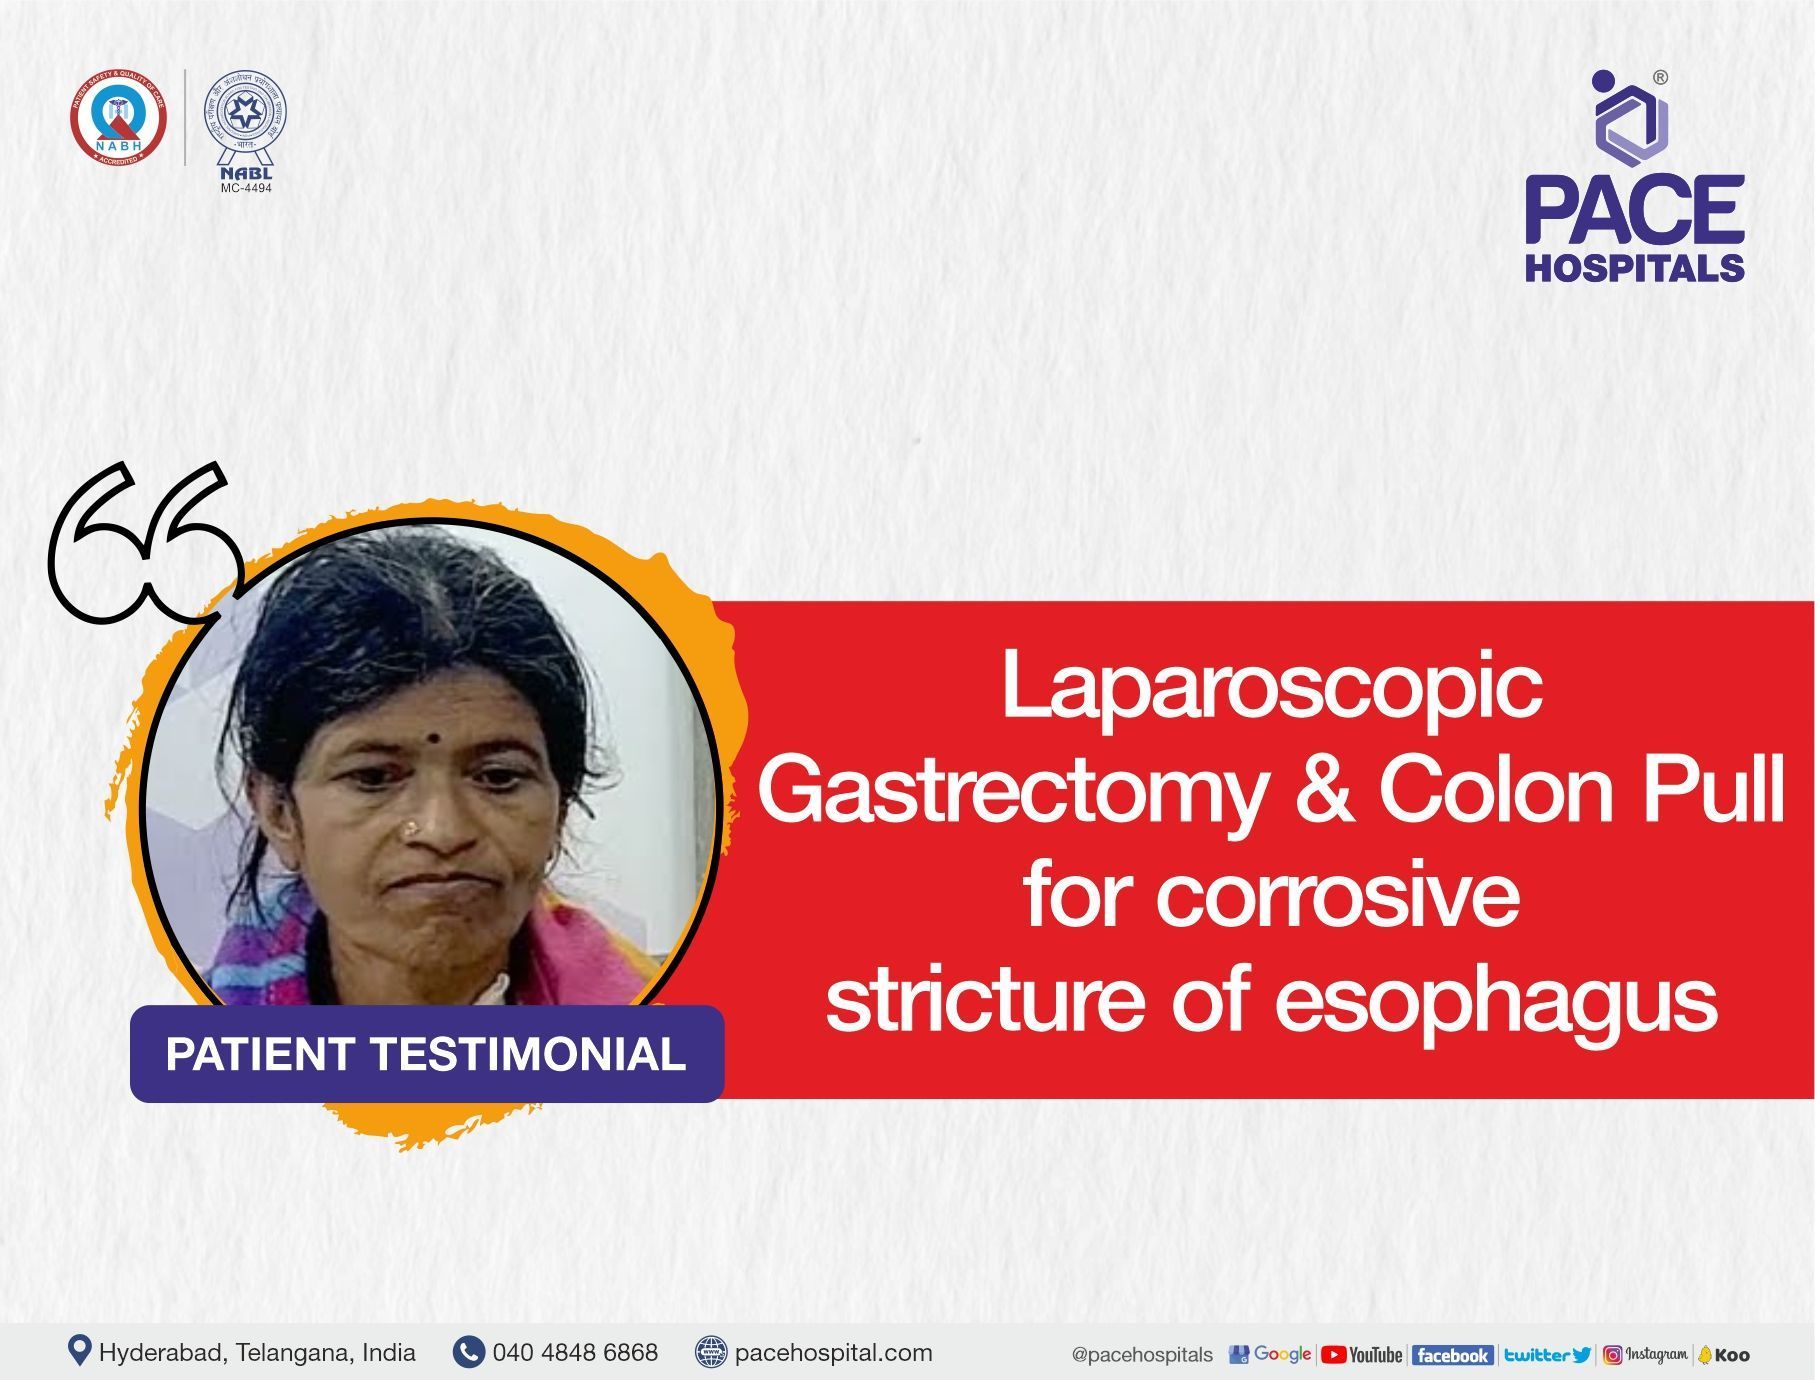 Laparoscopic Gastrectomy and Colon Pull for corrosive stricture of esophagus